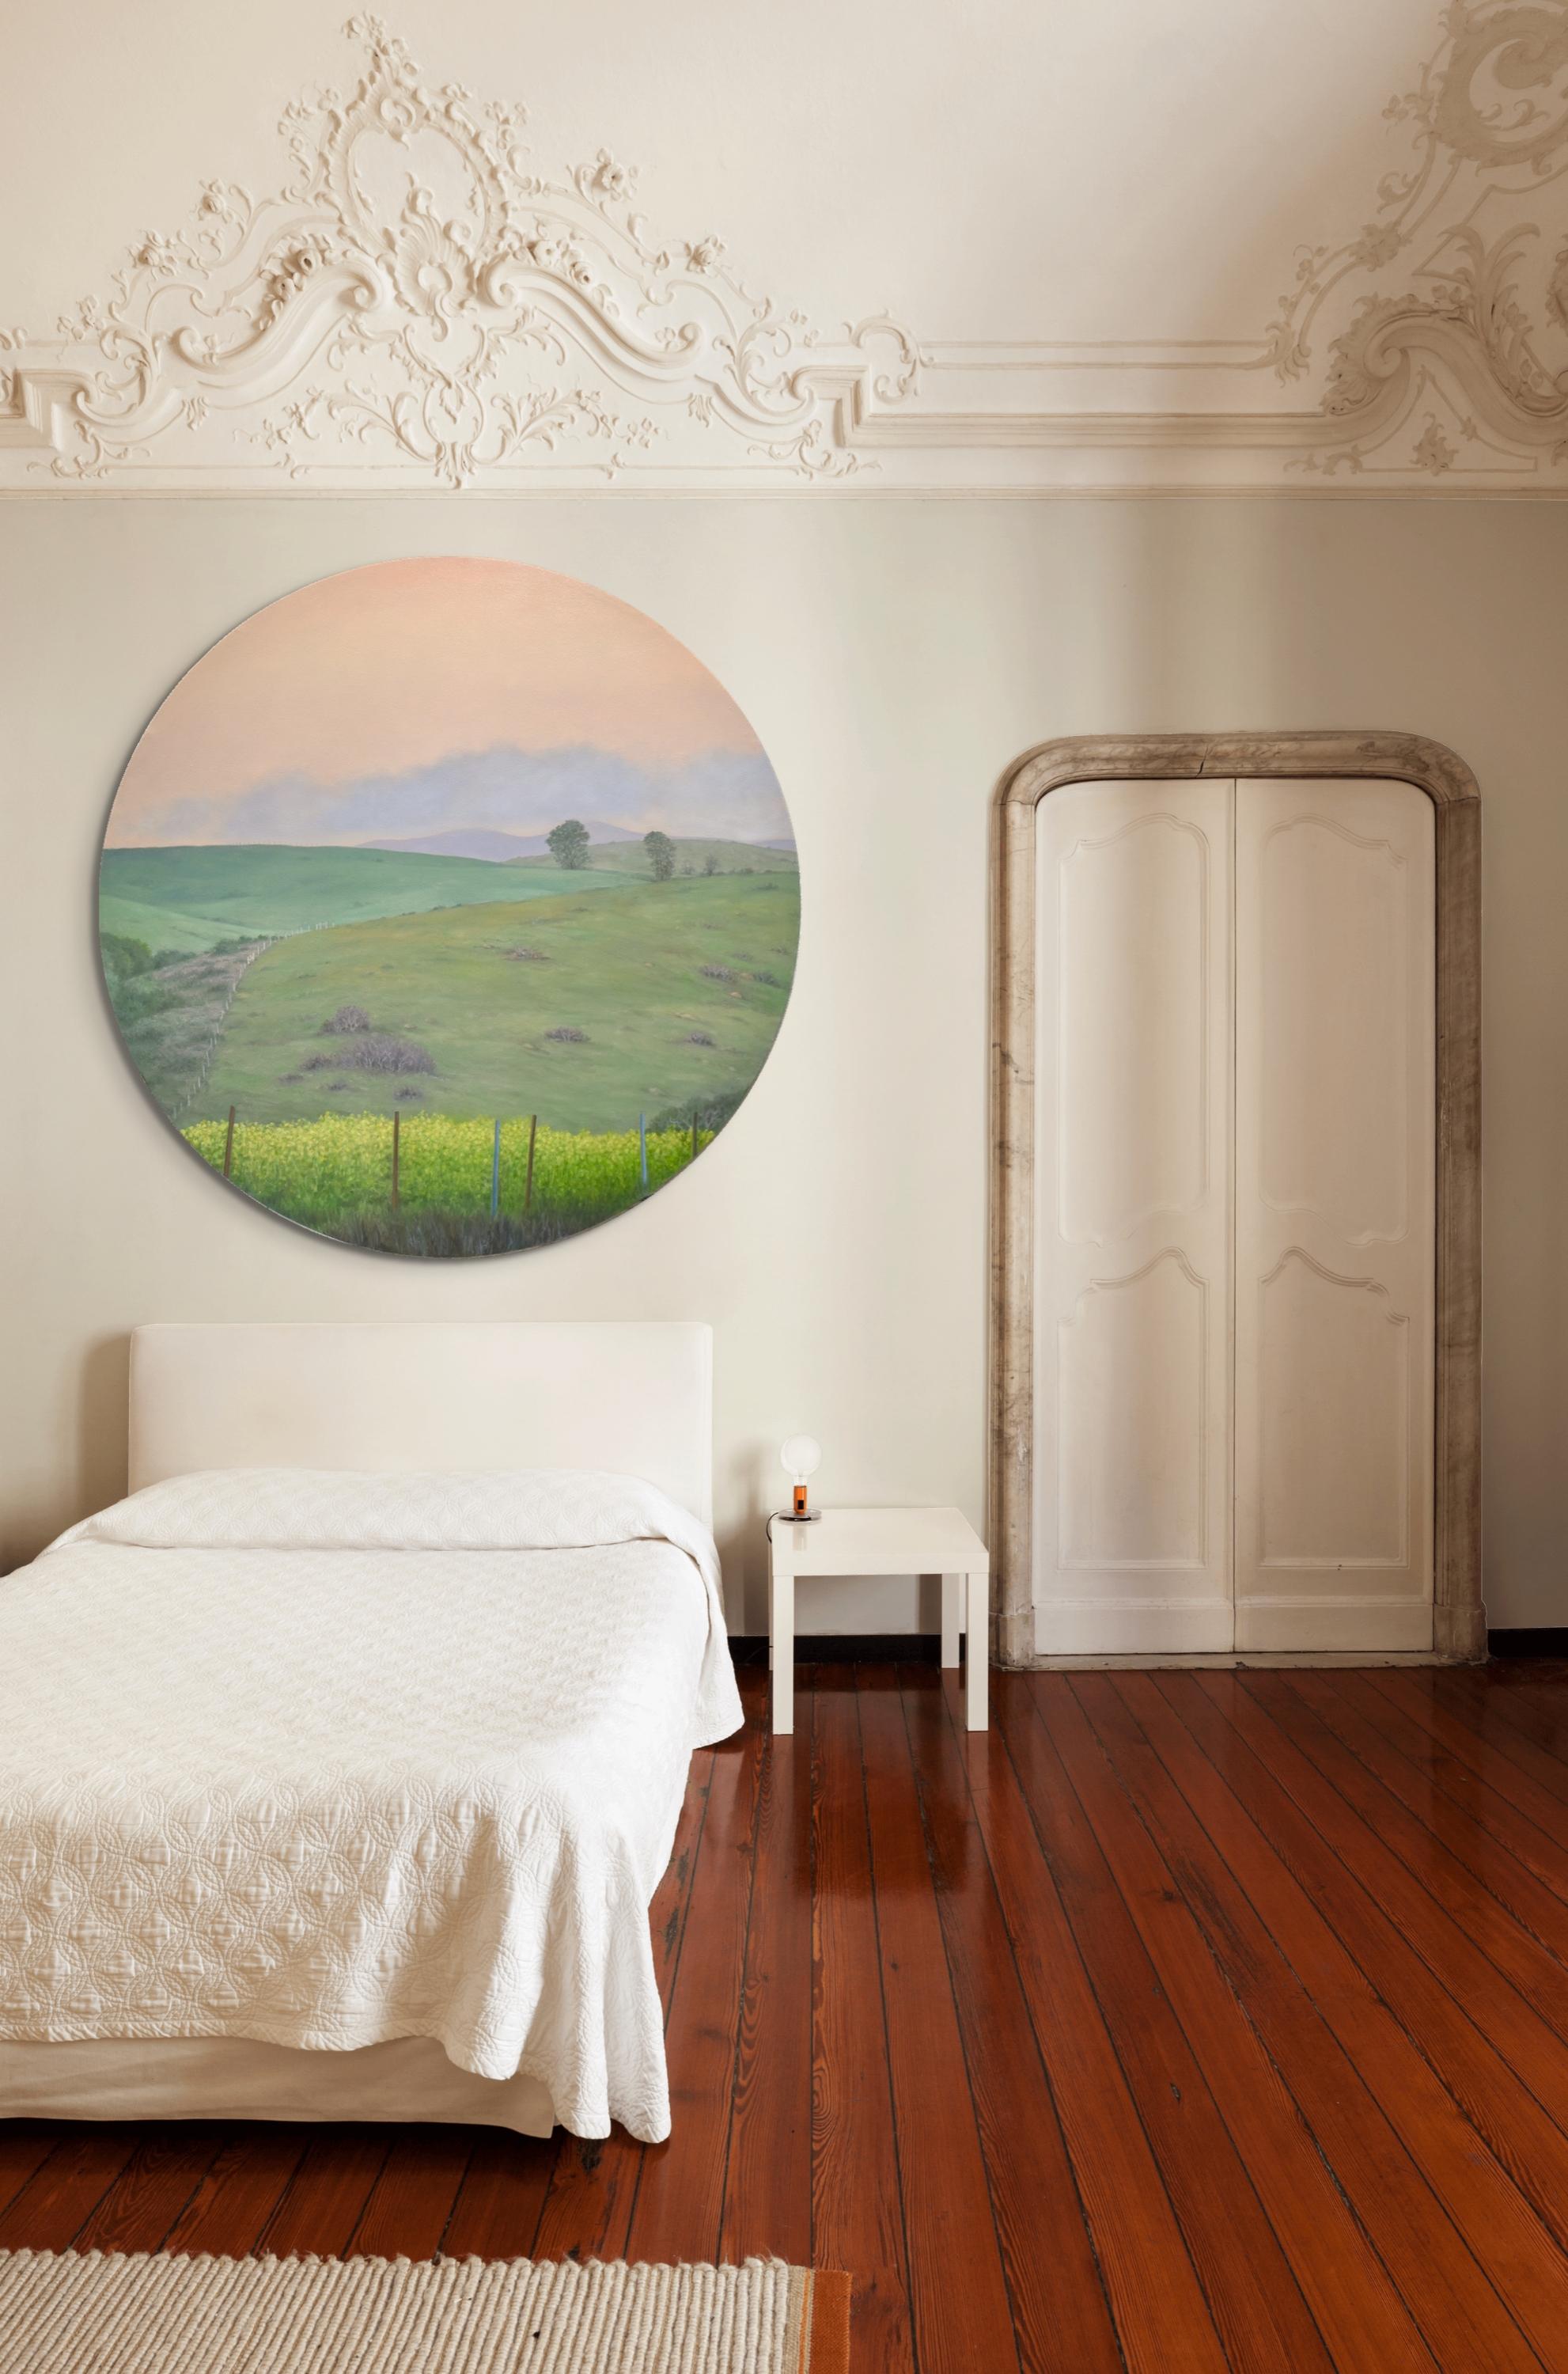 Landscape with Mustard Flowers - 48 inch circular canvas - Painting by Willard Dixon